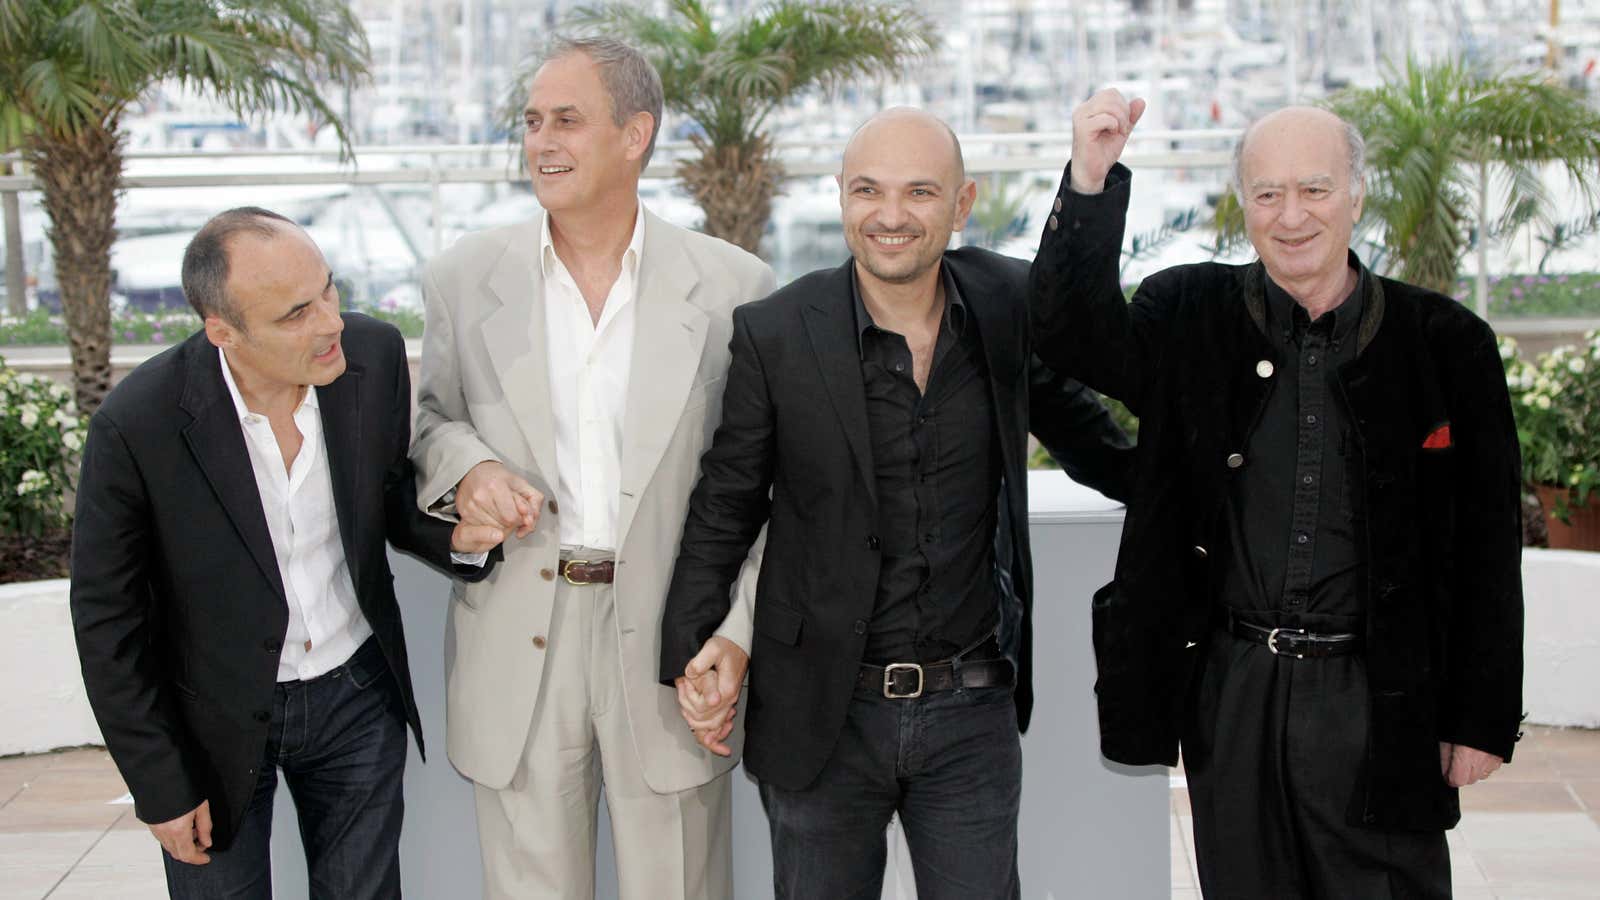 From left, Philippe Val, French director Daniel Leconte, Charlie Hebdo’s lawyer, Richard Malka, and French cartoonist Georges Wolinski at the Cannes Film Festival. Wolinski was killed in yesterday’s attack.